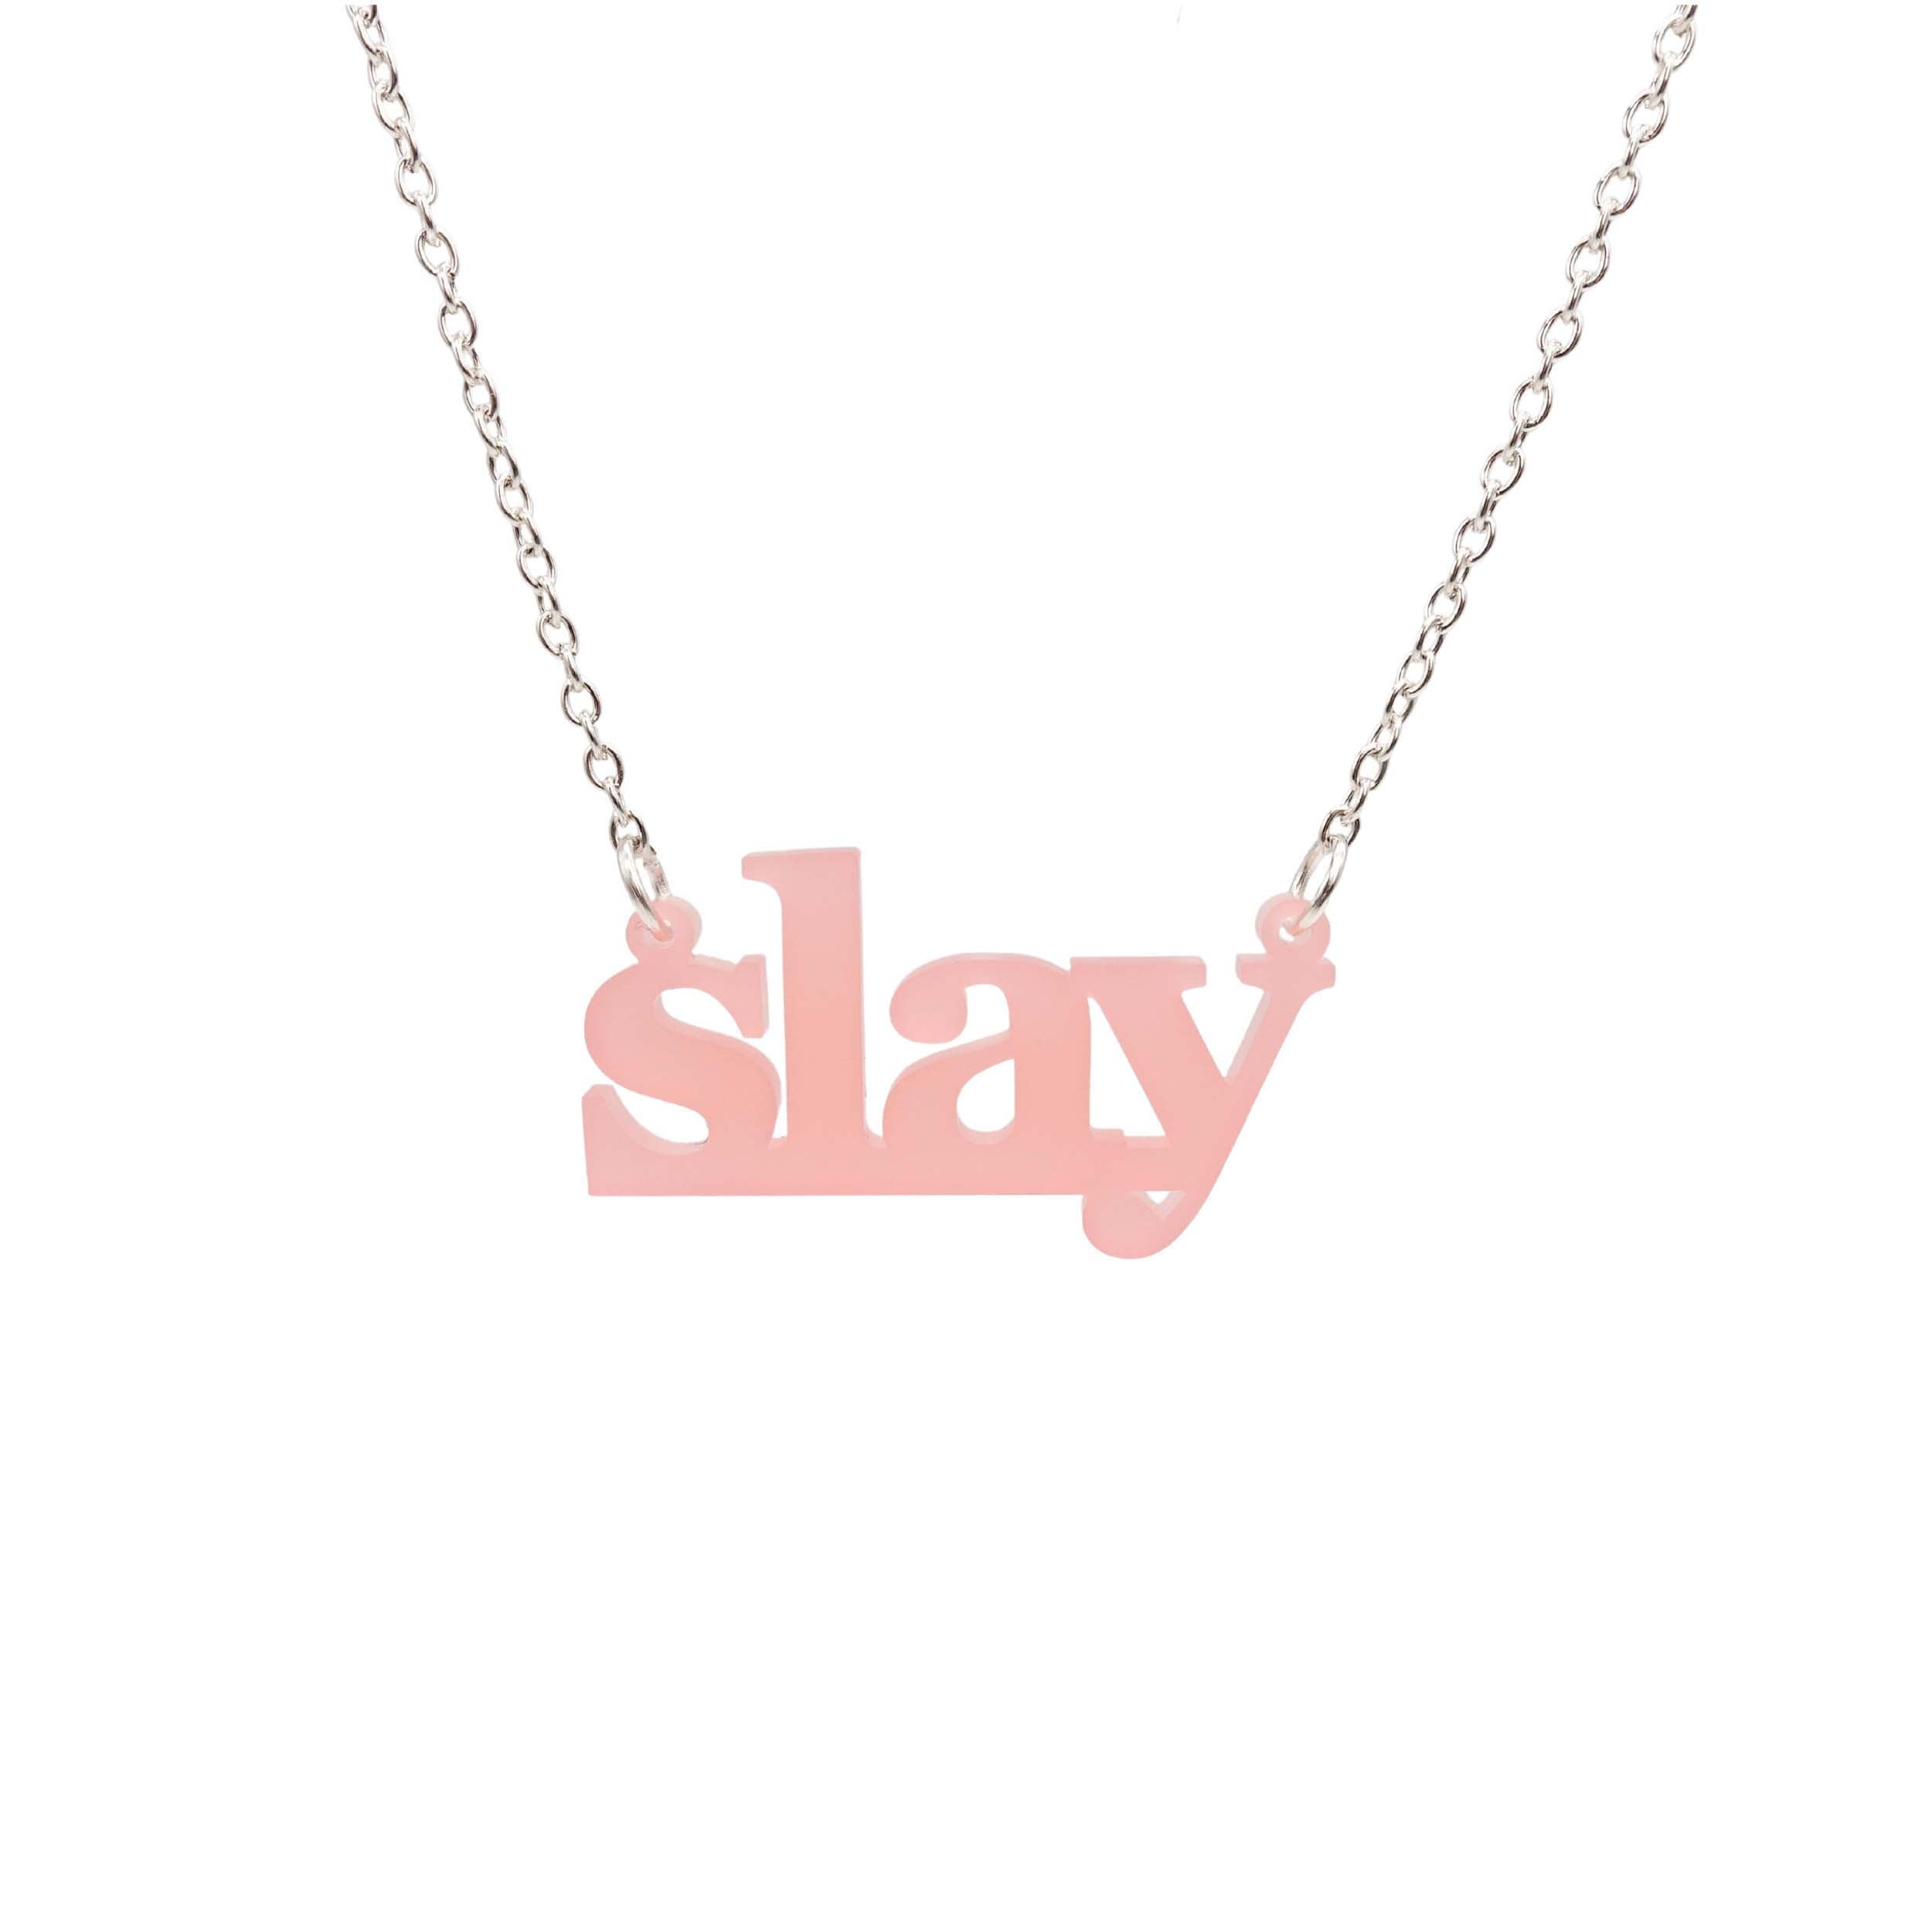 Slay necklace in blush pink on a silver chain shown hanging against a white background. Designed by Sarah Day for Wear and Resist. £2 goes to Women for Refugee Women charity. 